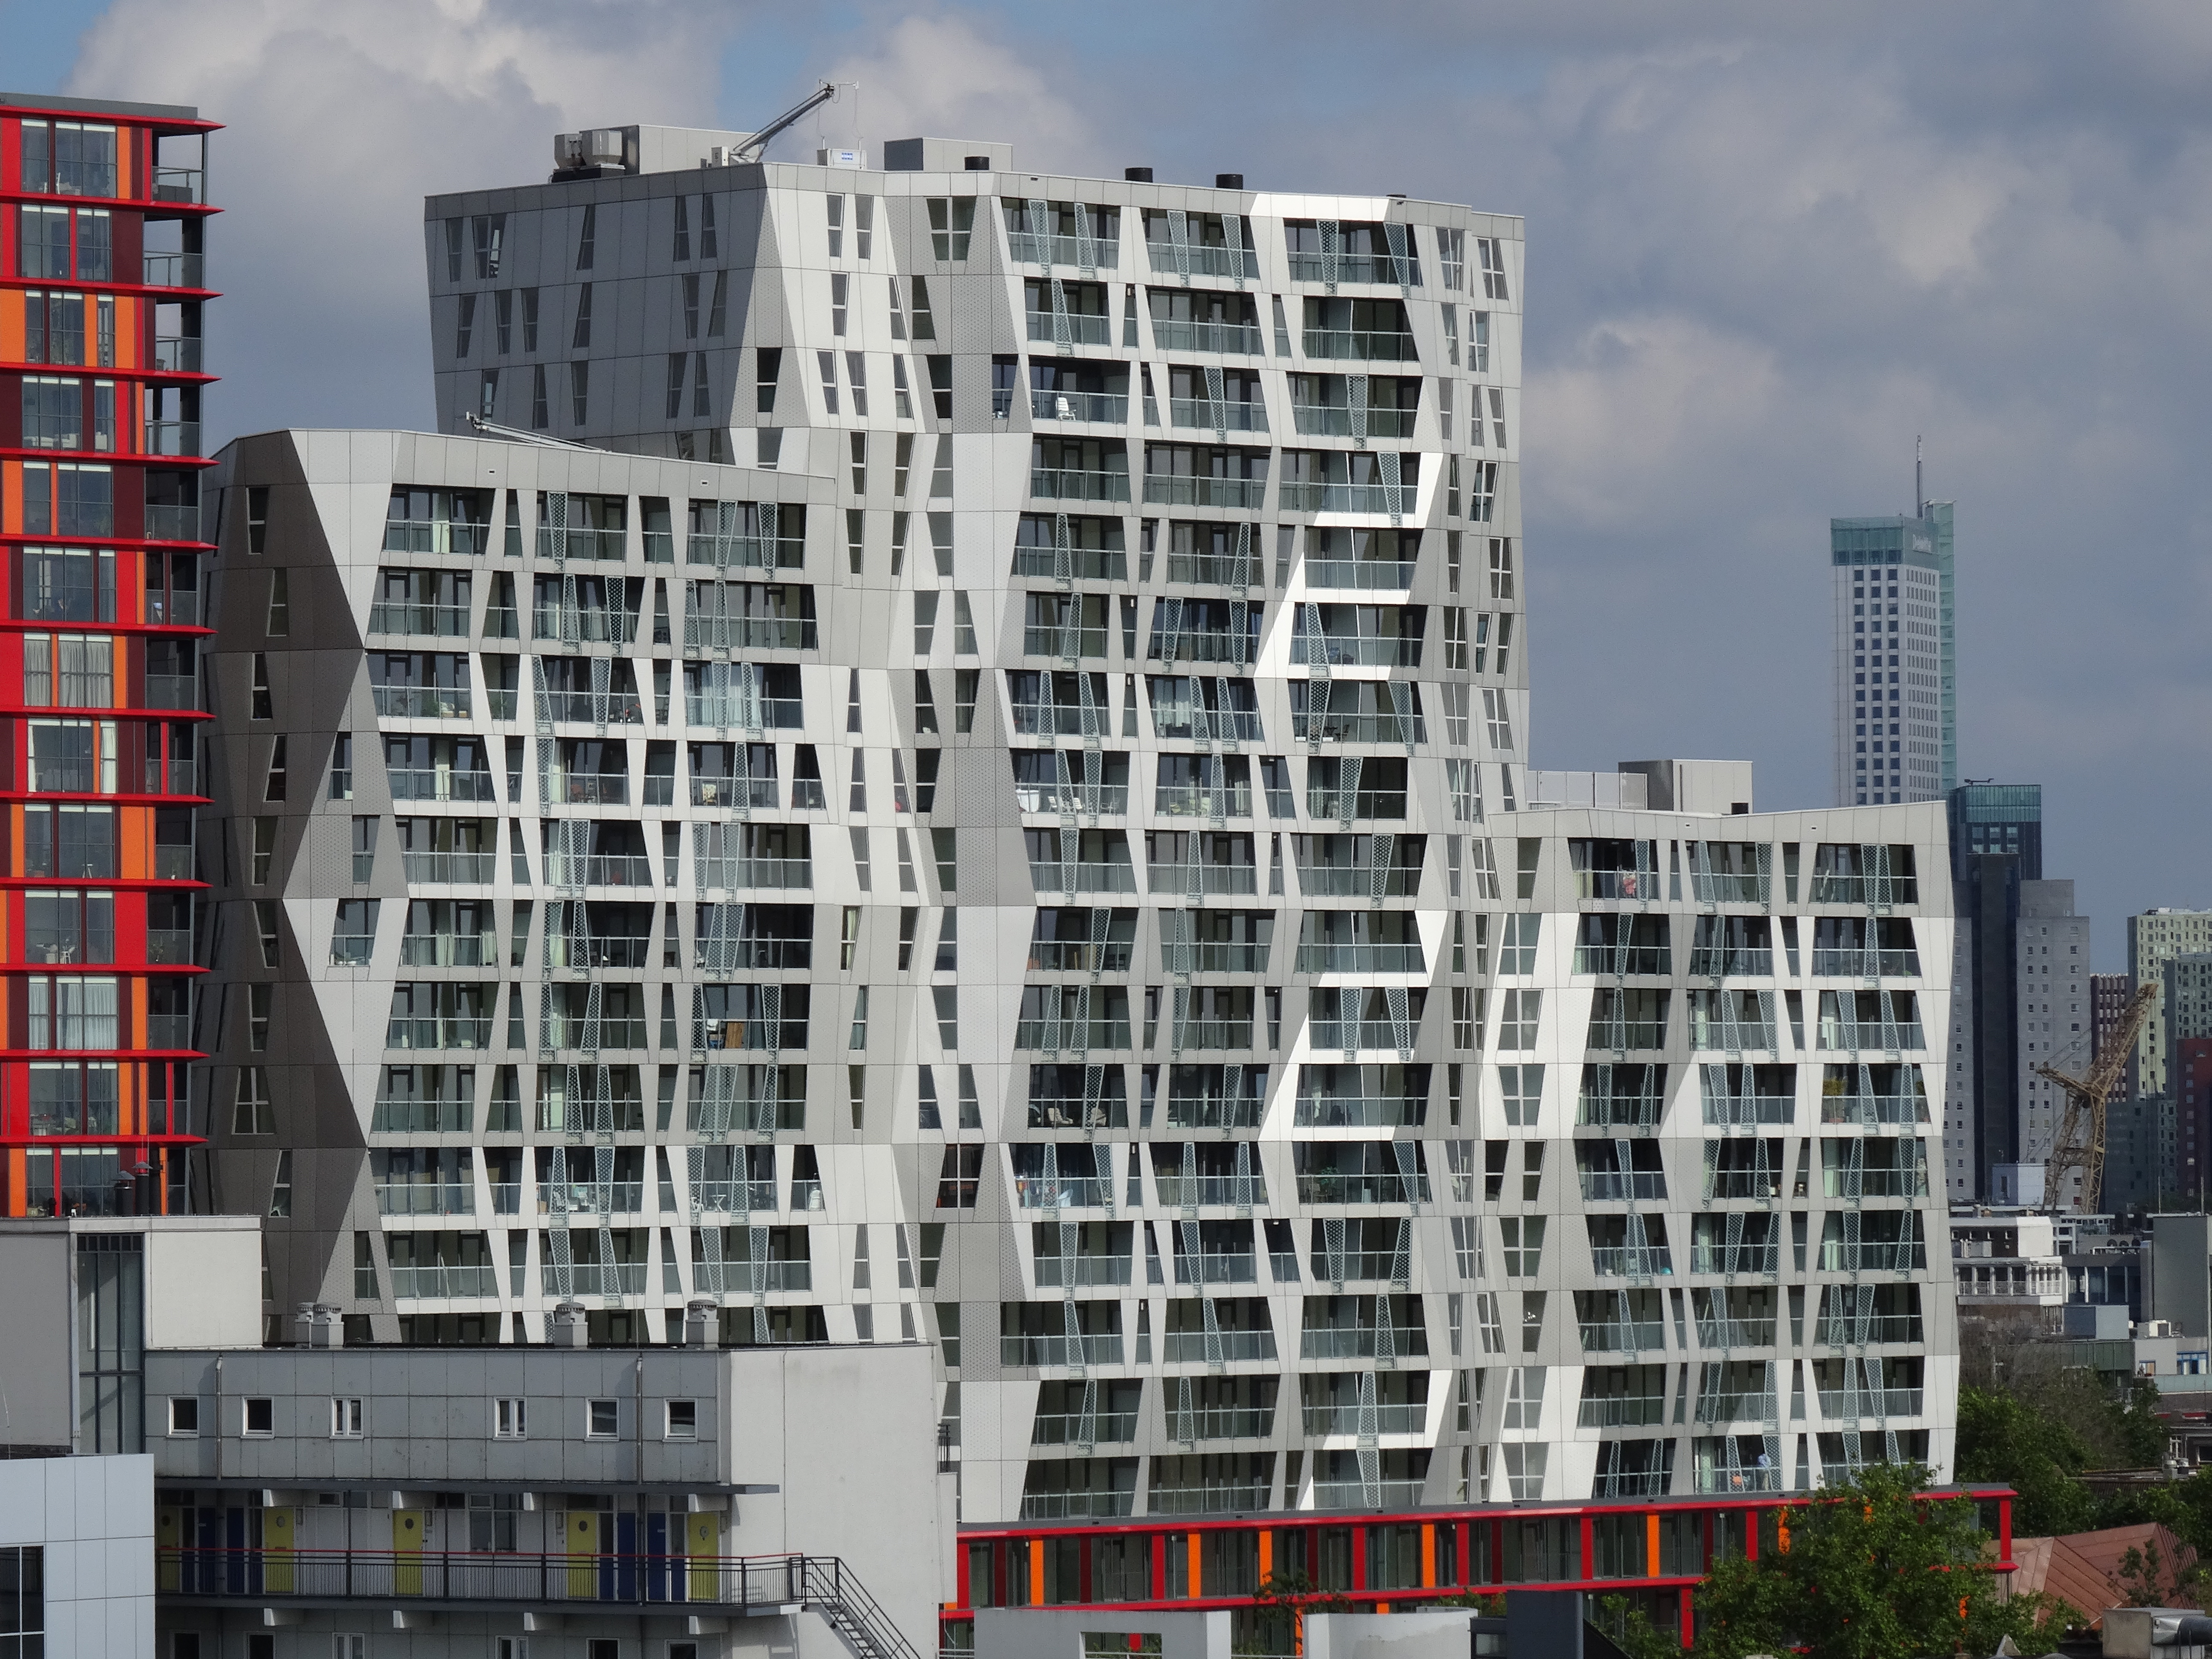 File:De Calypso - Rotterdam - View of the building as seen from the ...